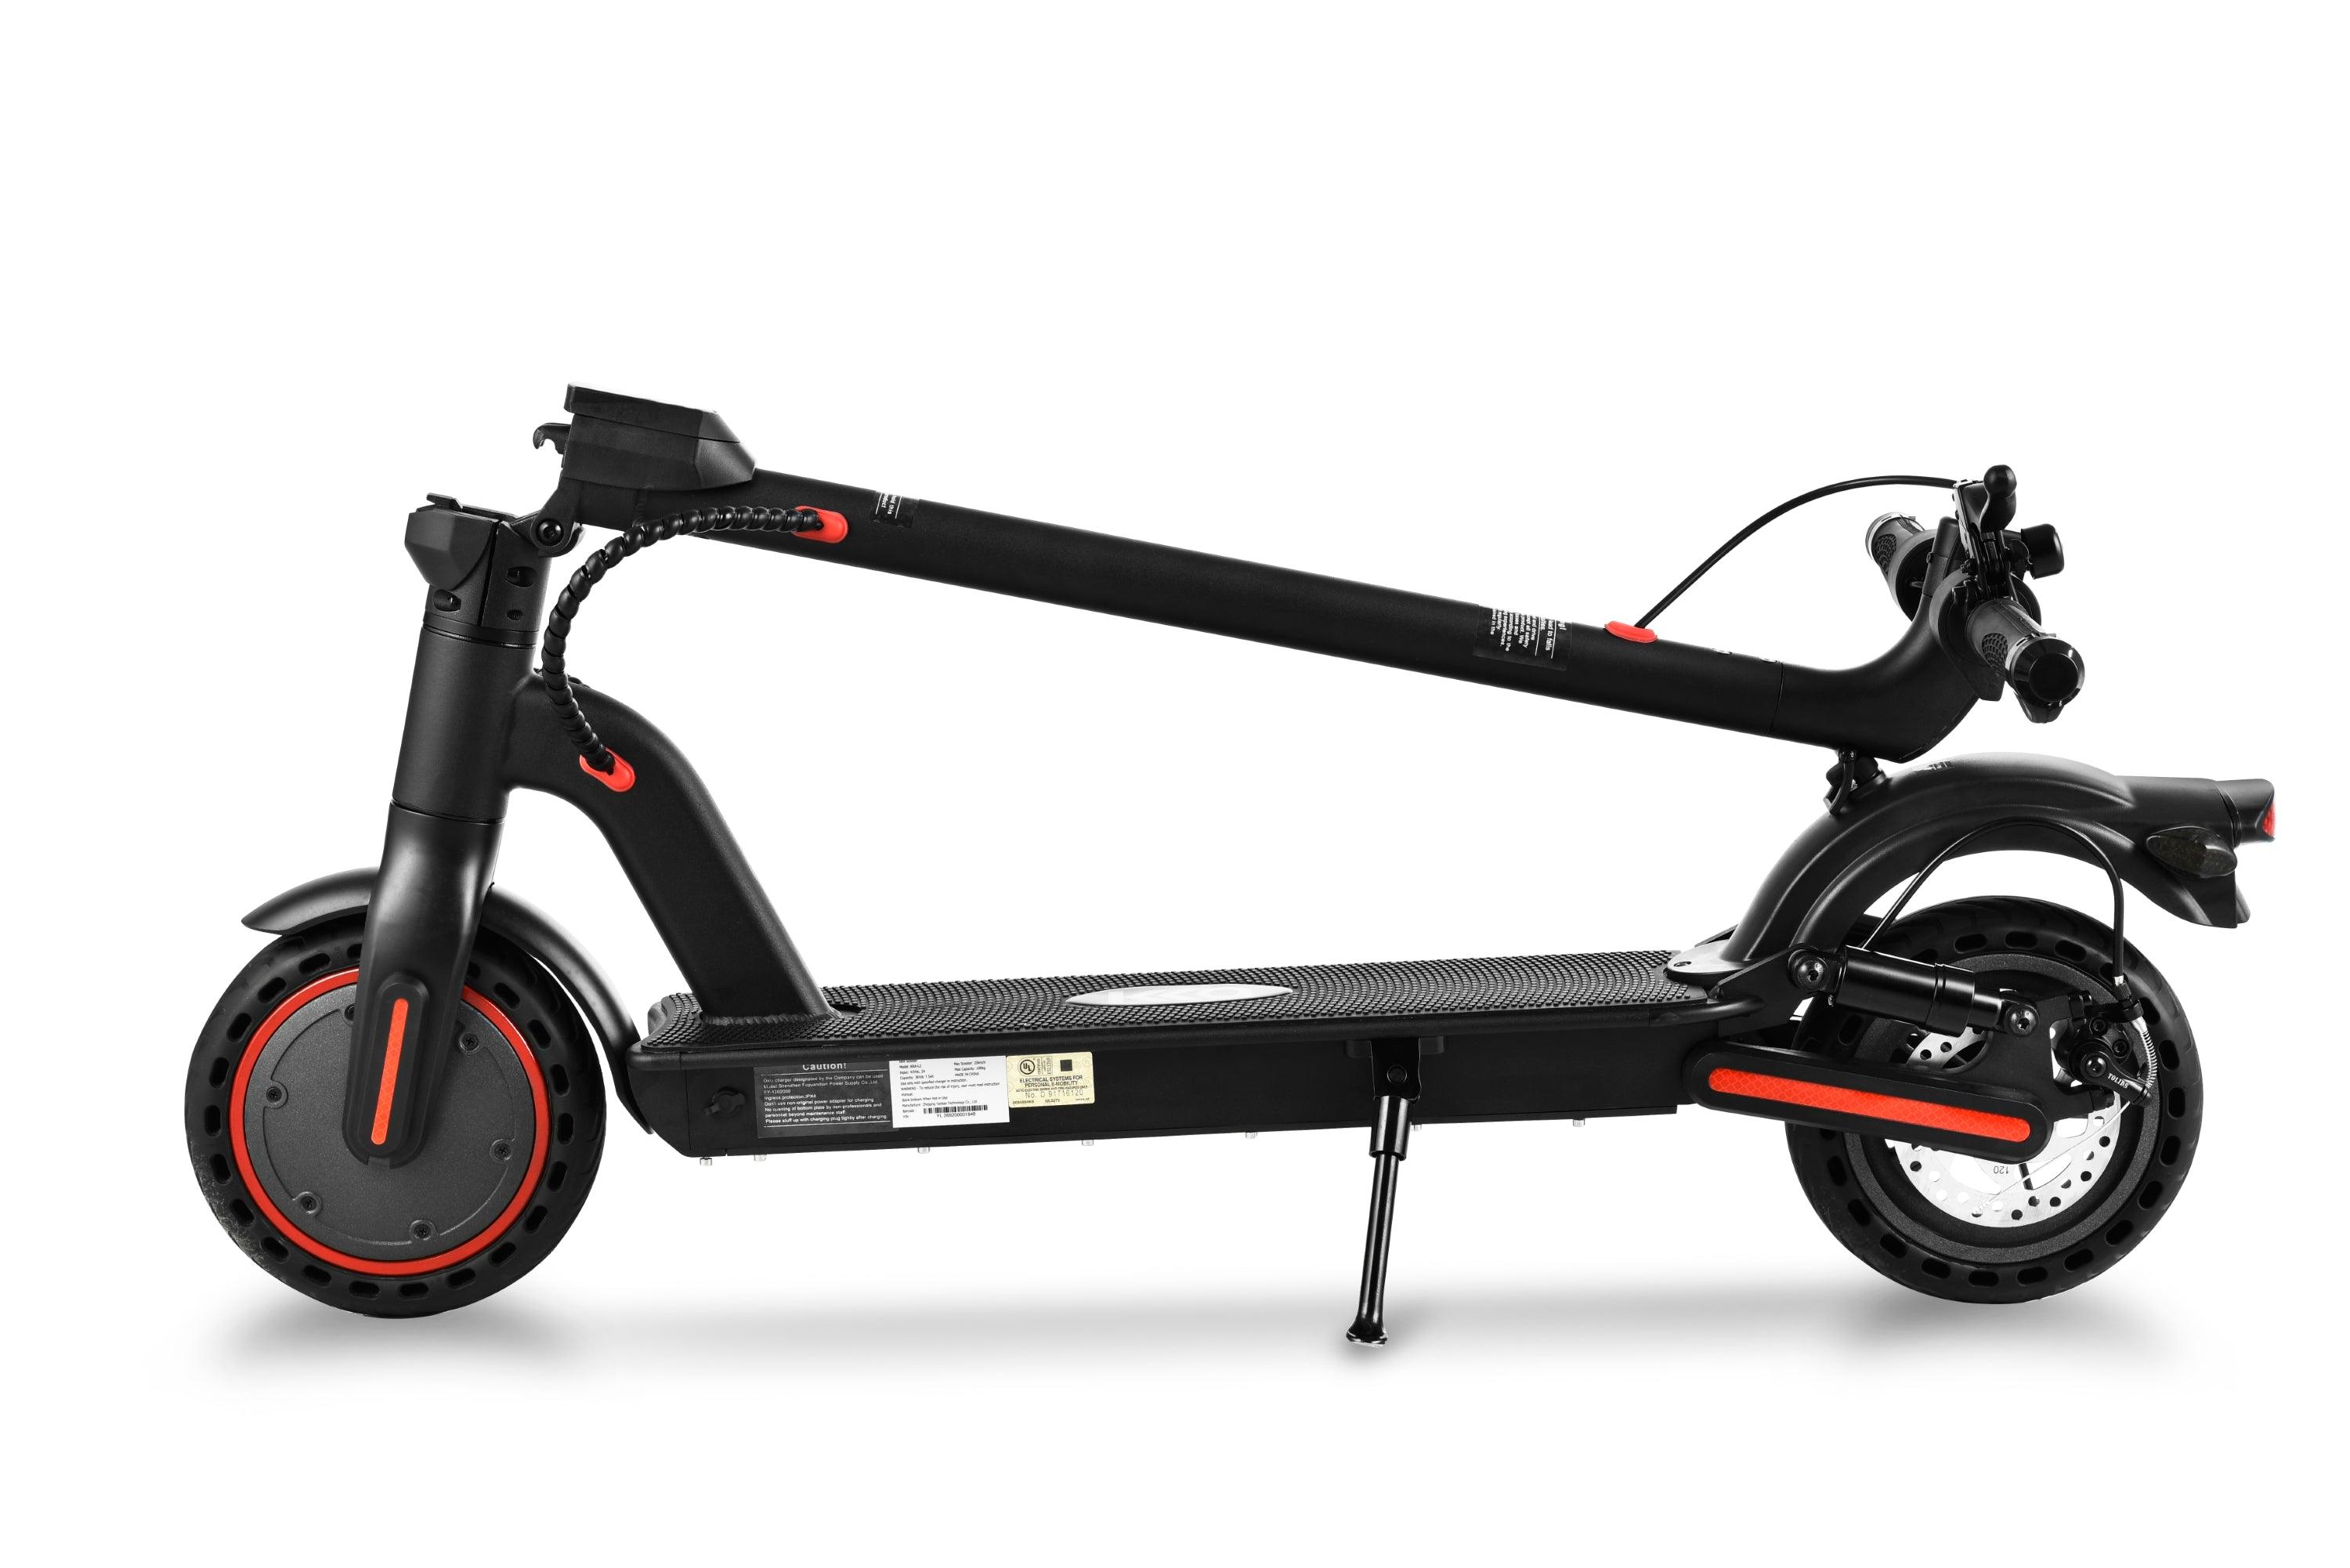 36V Freddo L2 E-Scooter 350W motor, shock absorbers, dual braking system and App, turn signal light and brake lights - American Kids Cars